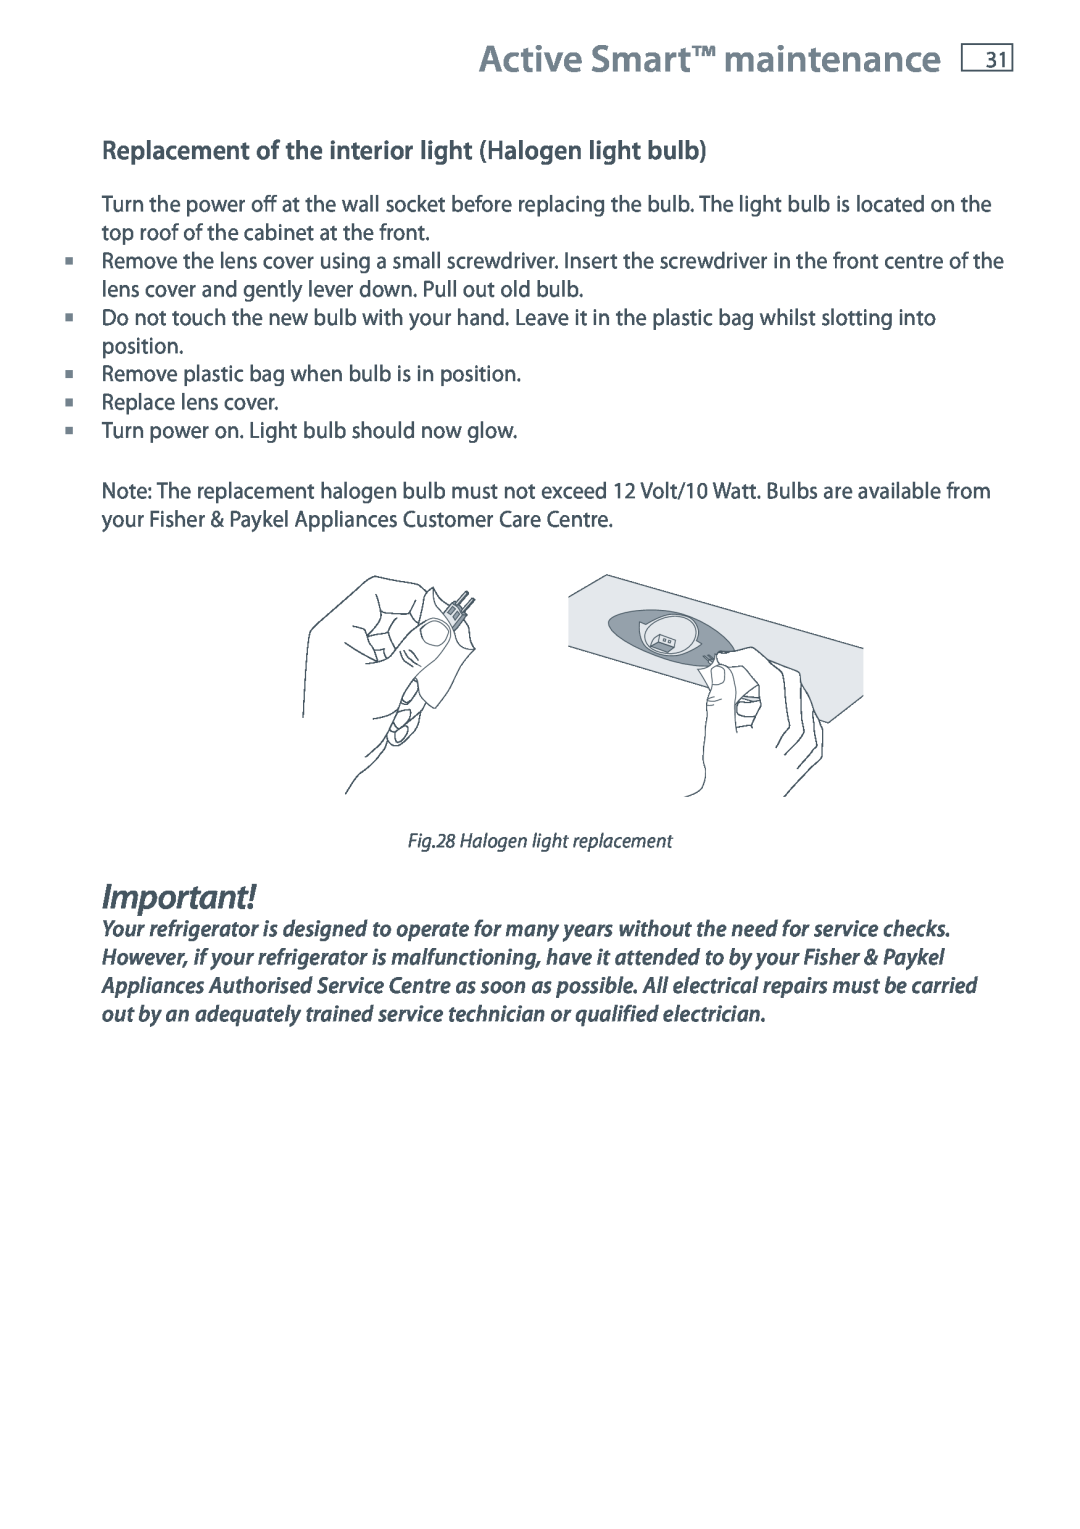 Fisher & Paykel RF610A, RF201A, RF540A installation instructions Active Smart maintenance 